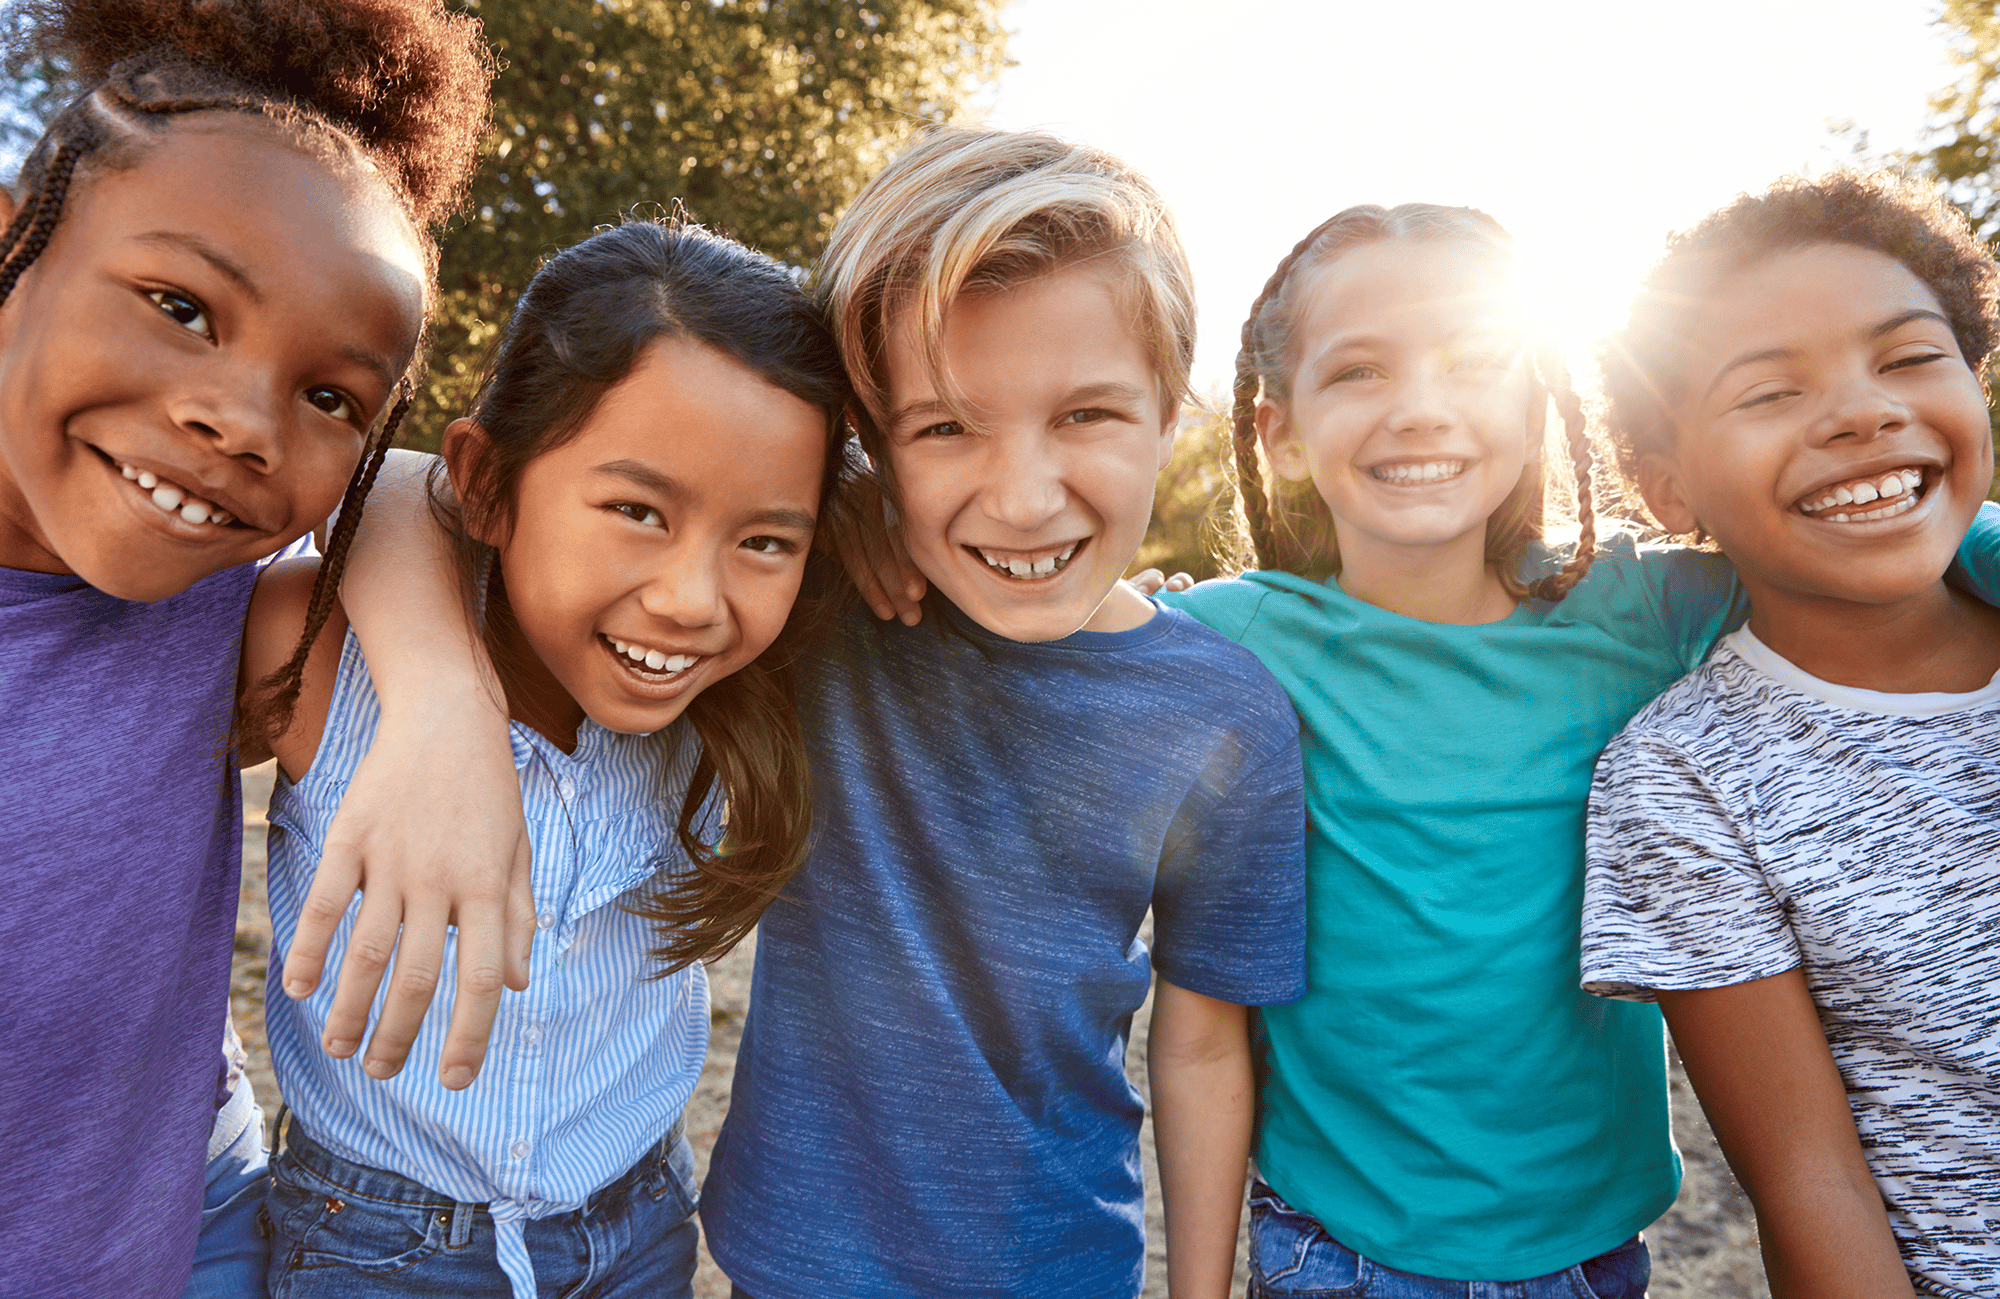 Pediatric Dental Emergencies - How to Handle Them With Ease! Children's Dental Emergencies in Rigby. RPD. fillings, mouthguards, preventative and emergency dentist in Rigby, ID 83442 Call:208-745-2010 home rigby pediatric dental dentist in rigby ID